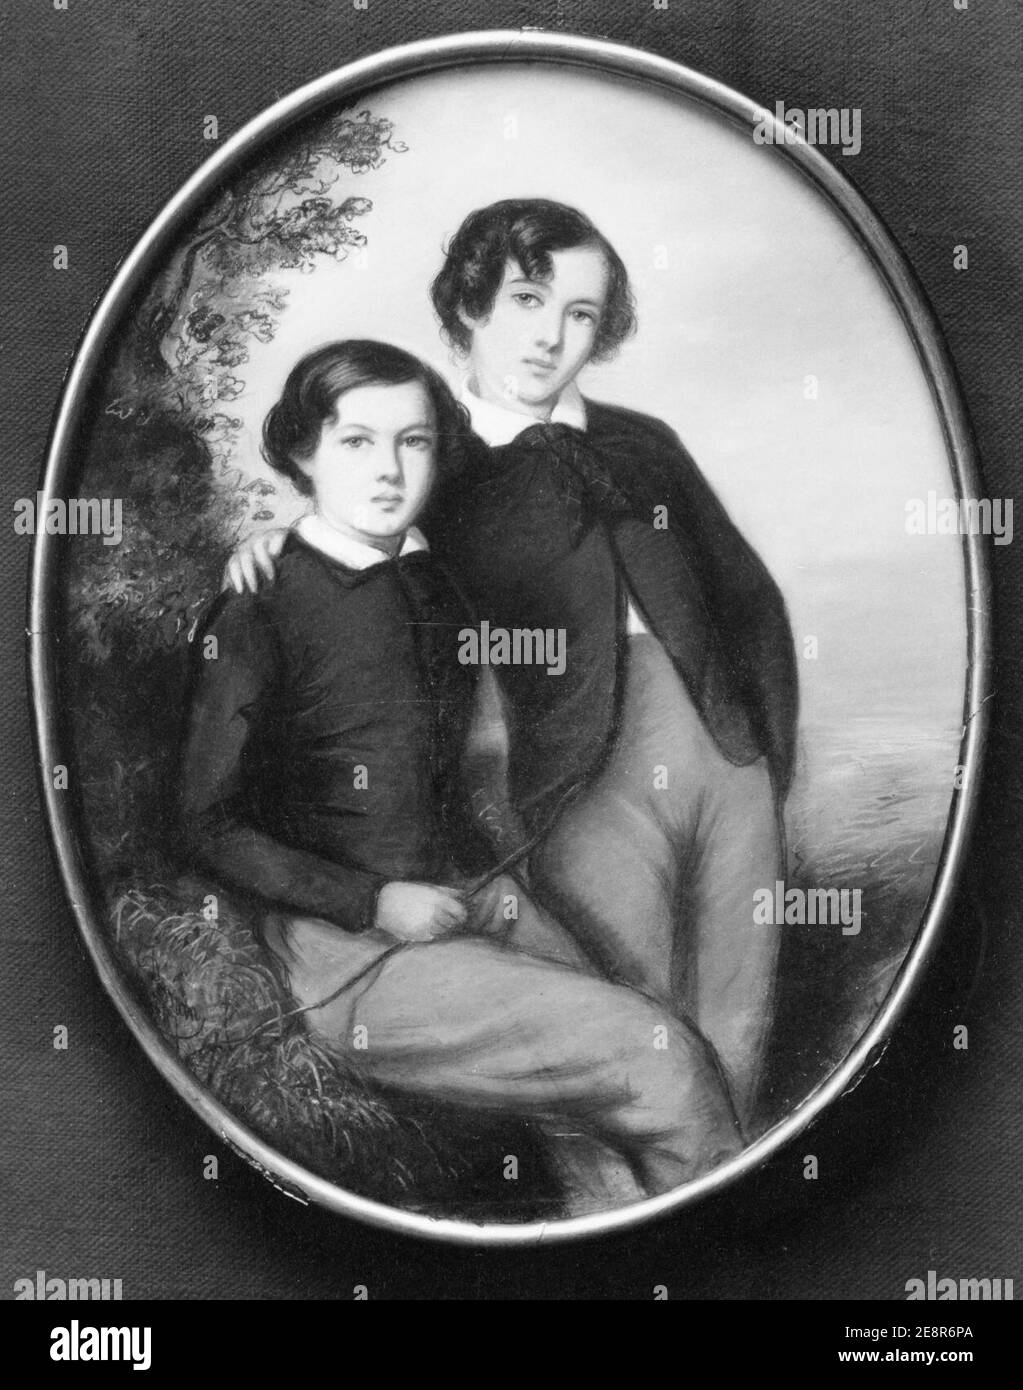 Miniature by unknown artist showing two brothers, James McNeill Whistler, 15 years old, and William Whistler, 13 years old Stock Photo